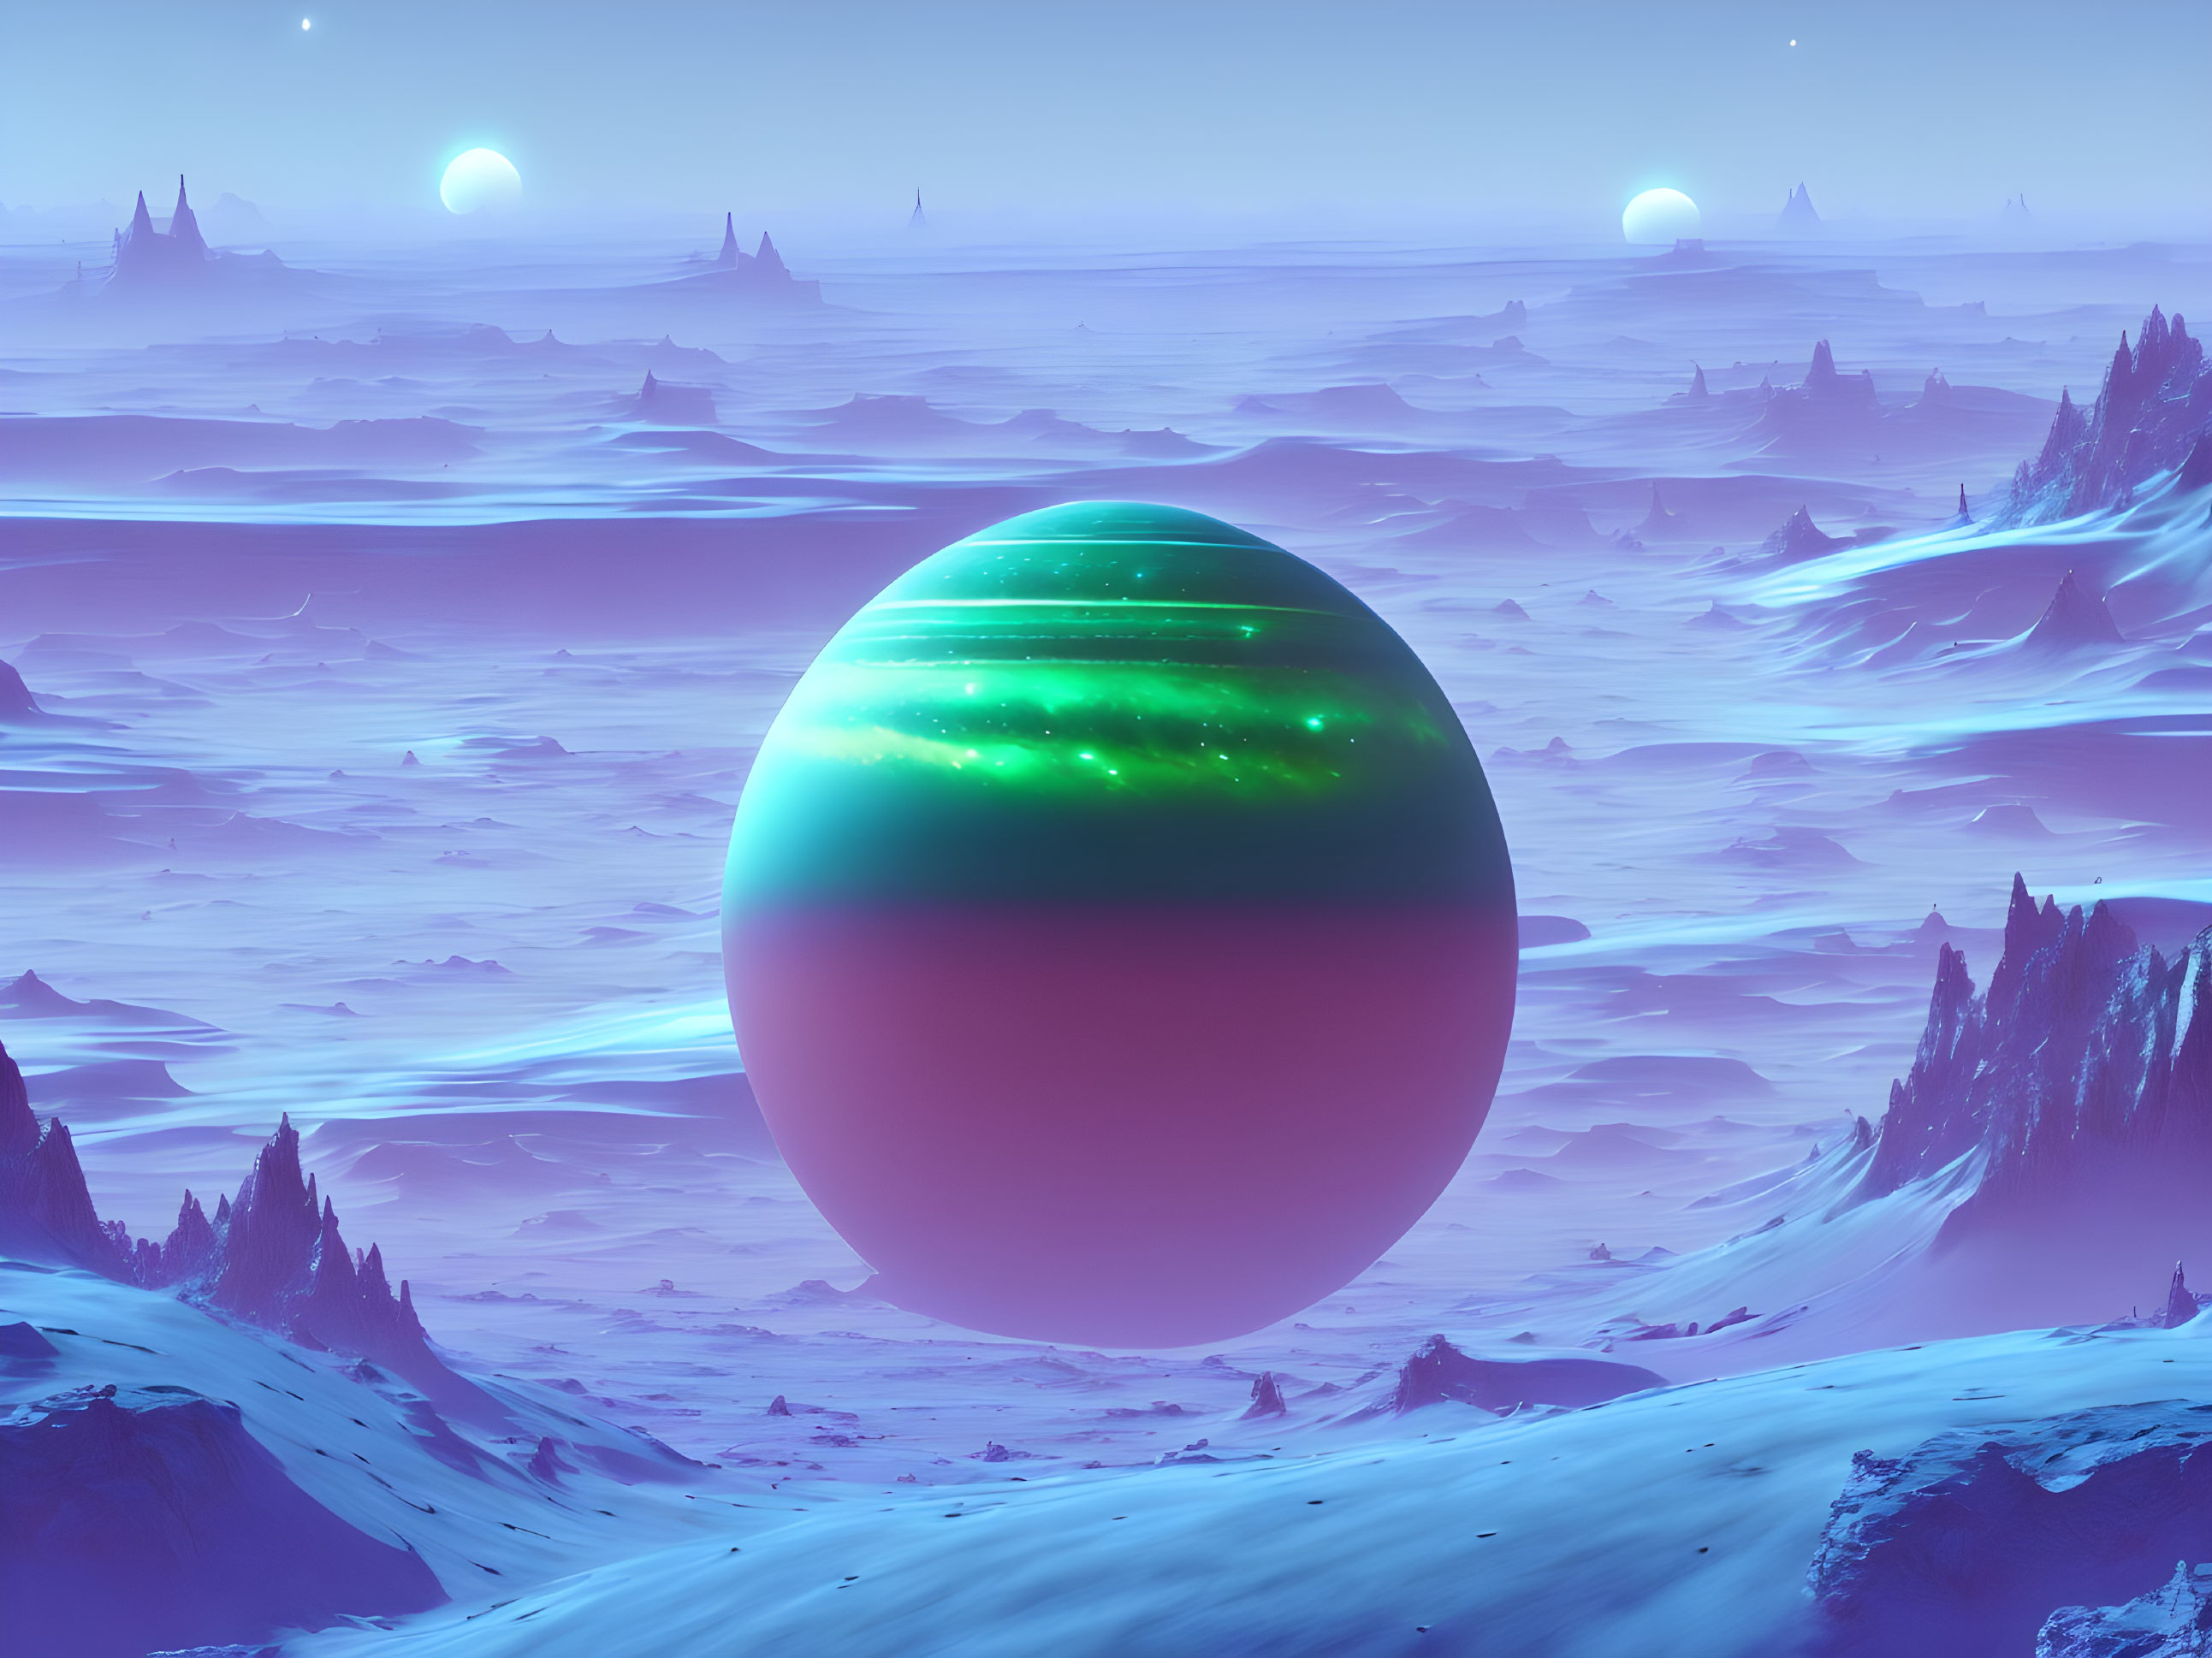 A planet in a snowy landscape